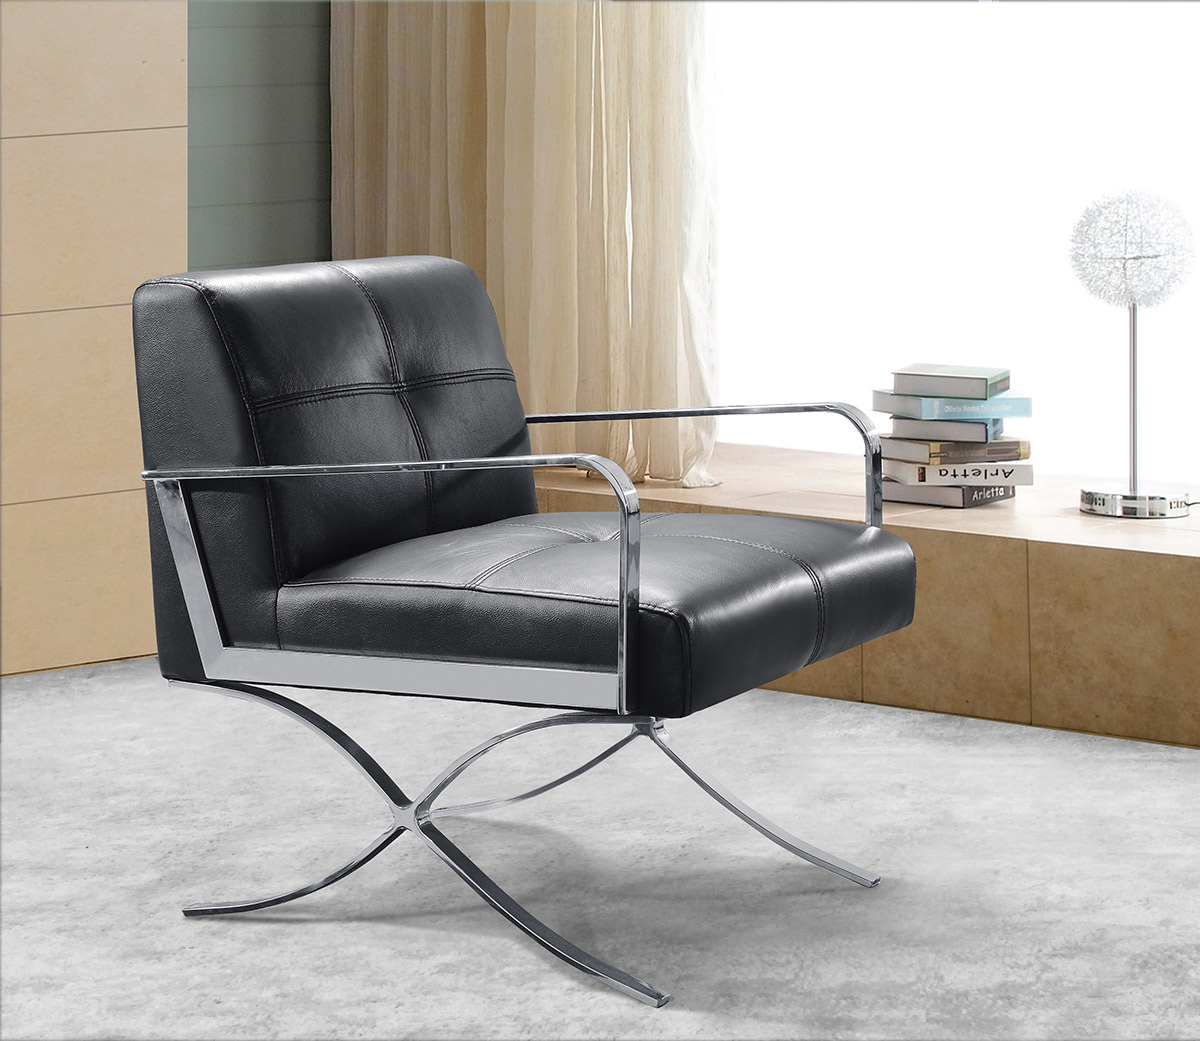 31" Black Leather and Steel Lounge Chair